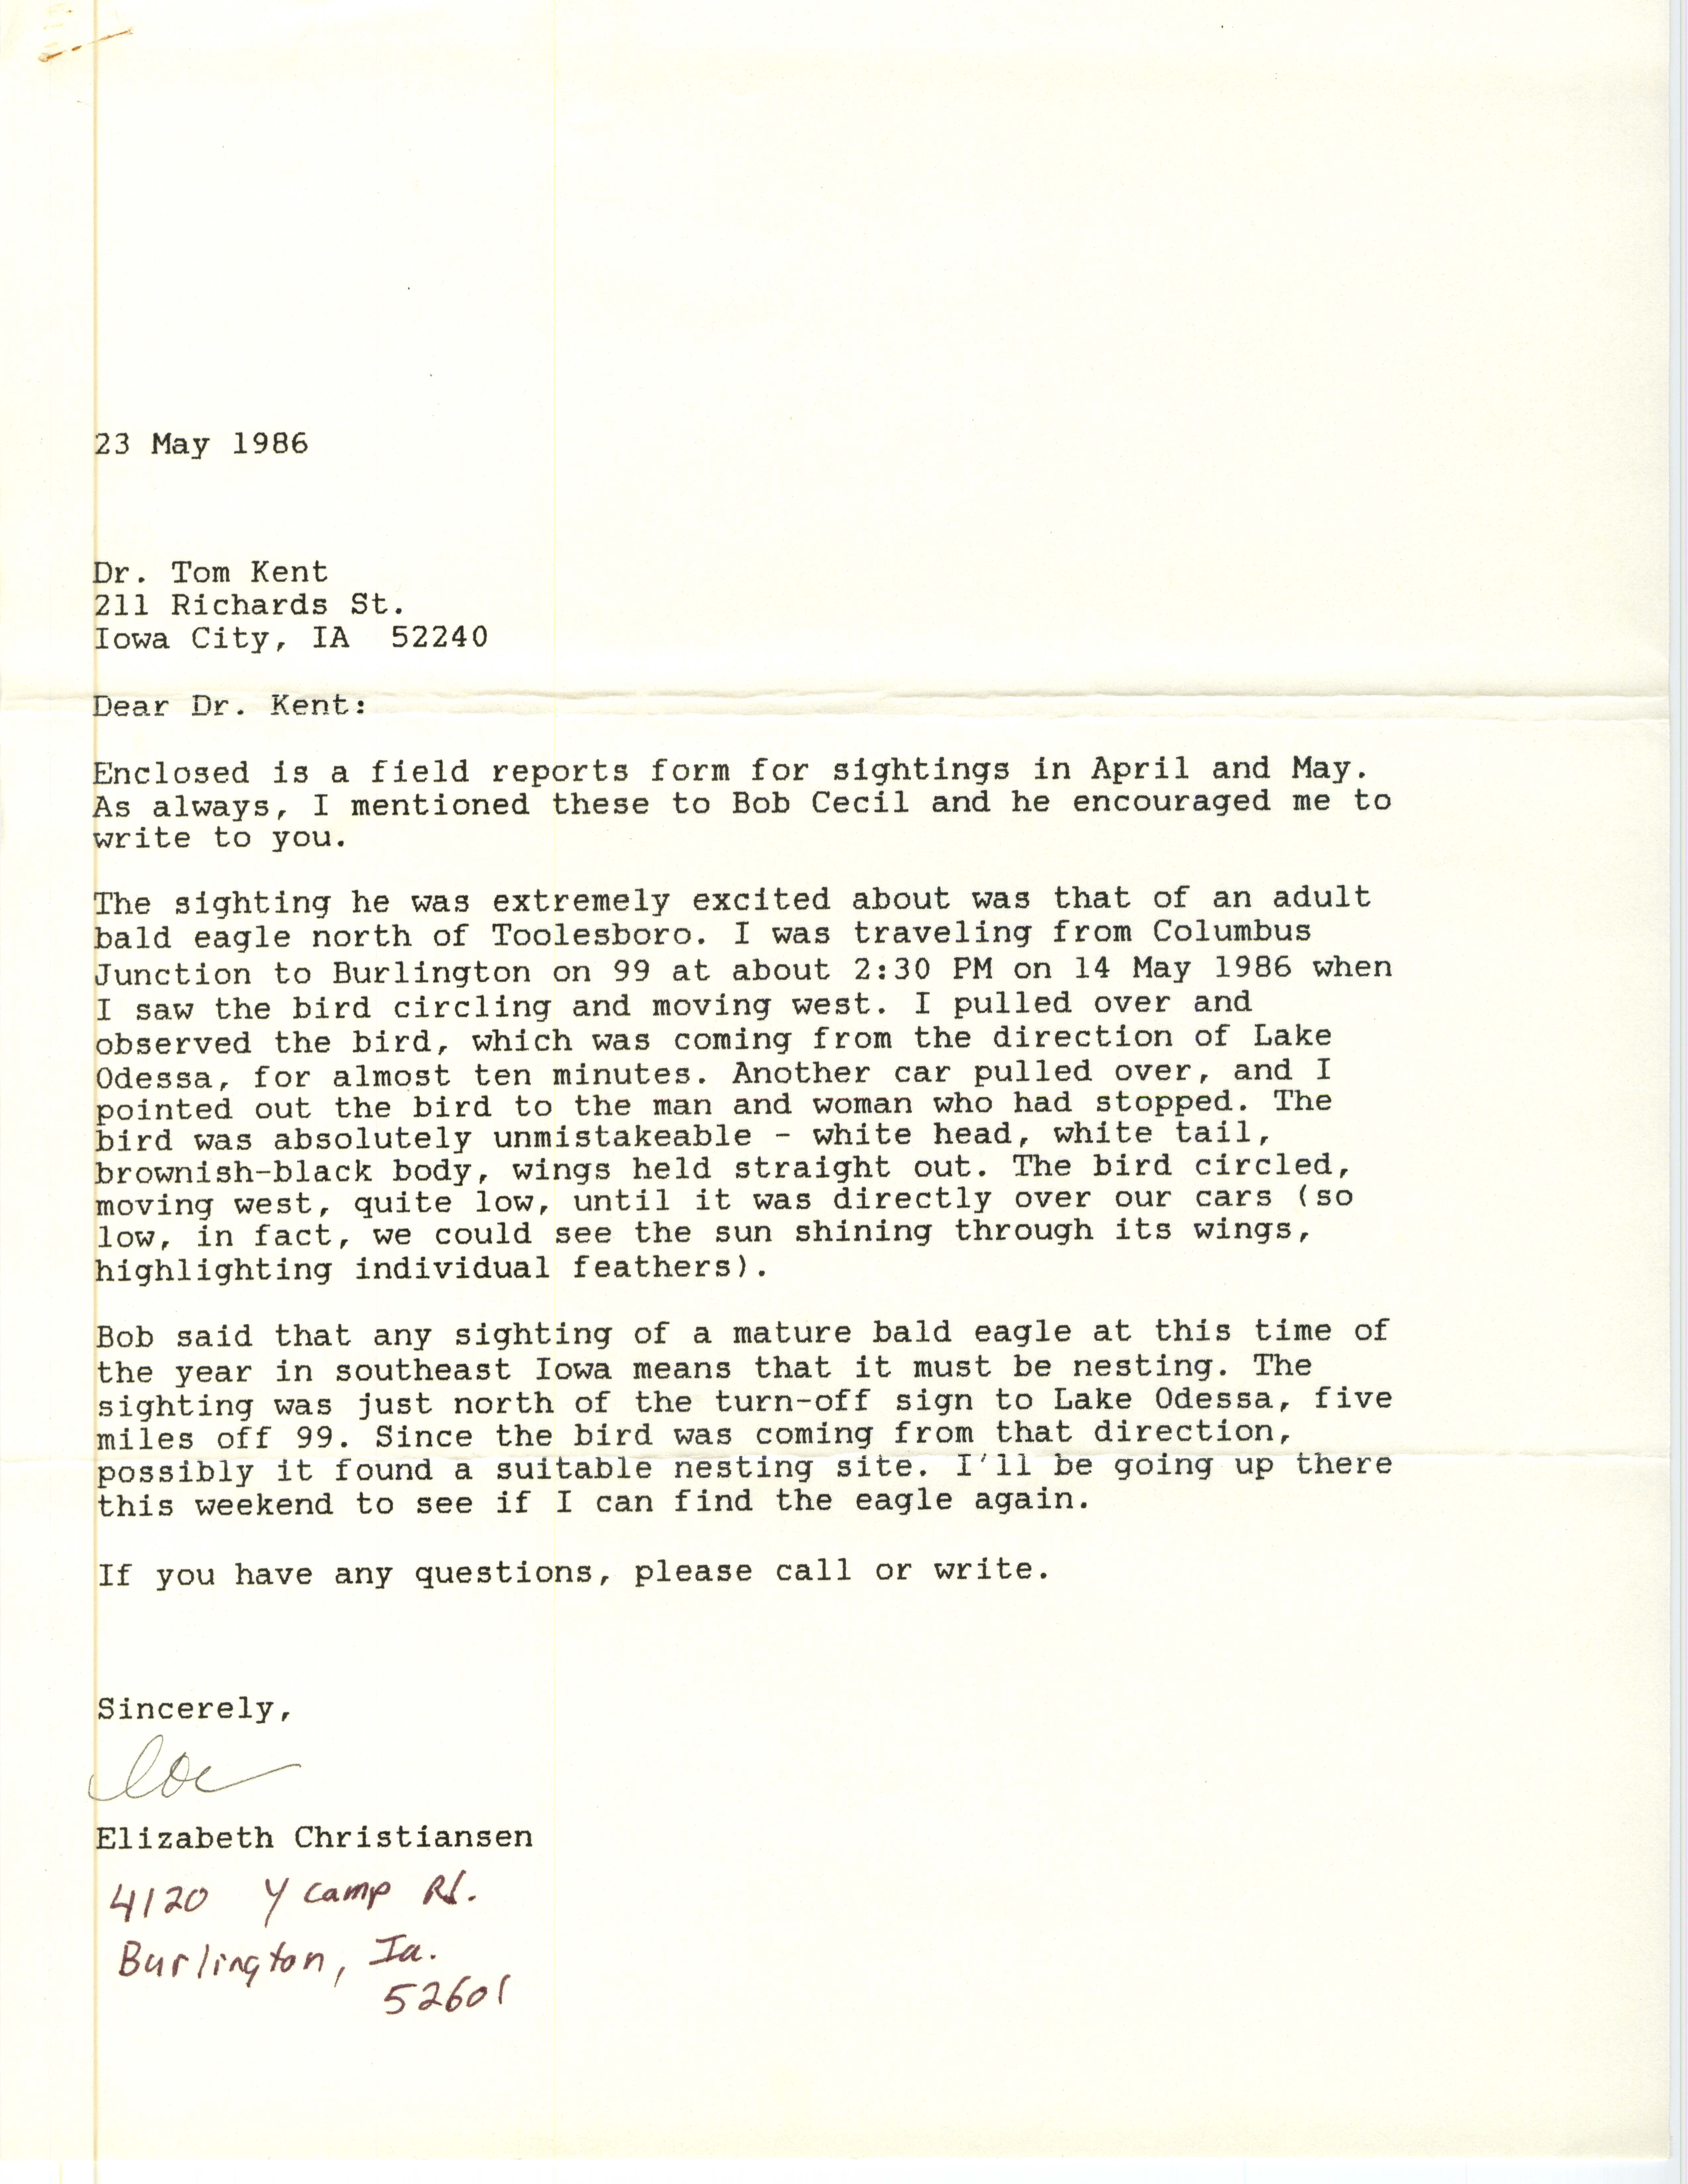 Elizabeth Christiansen letter to Thomas Kent regarding field reports for April and May, May 23, 1986